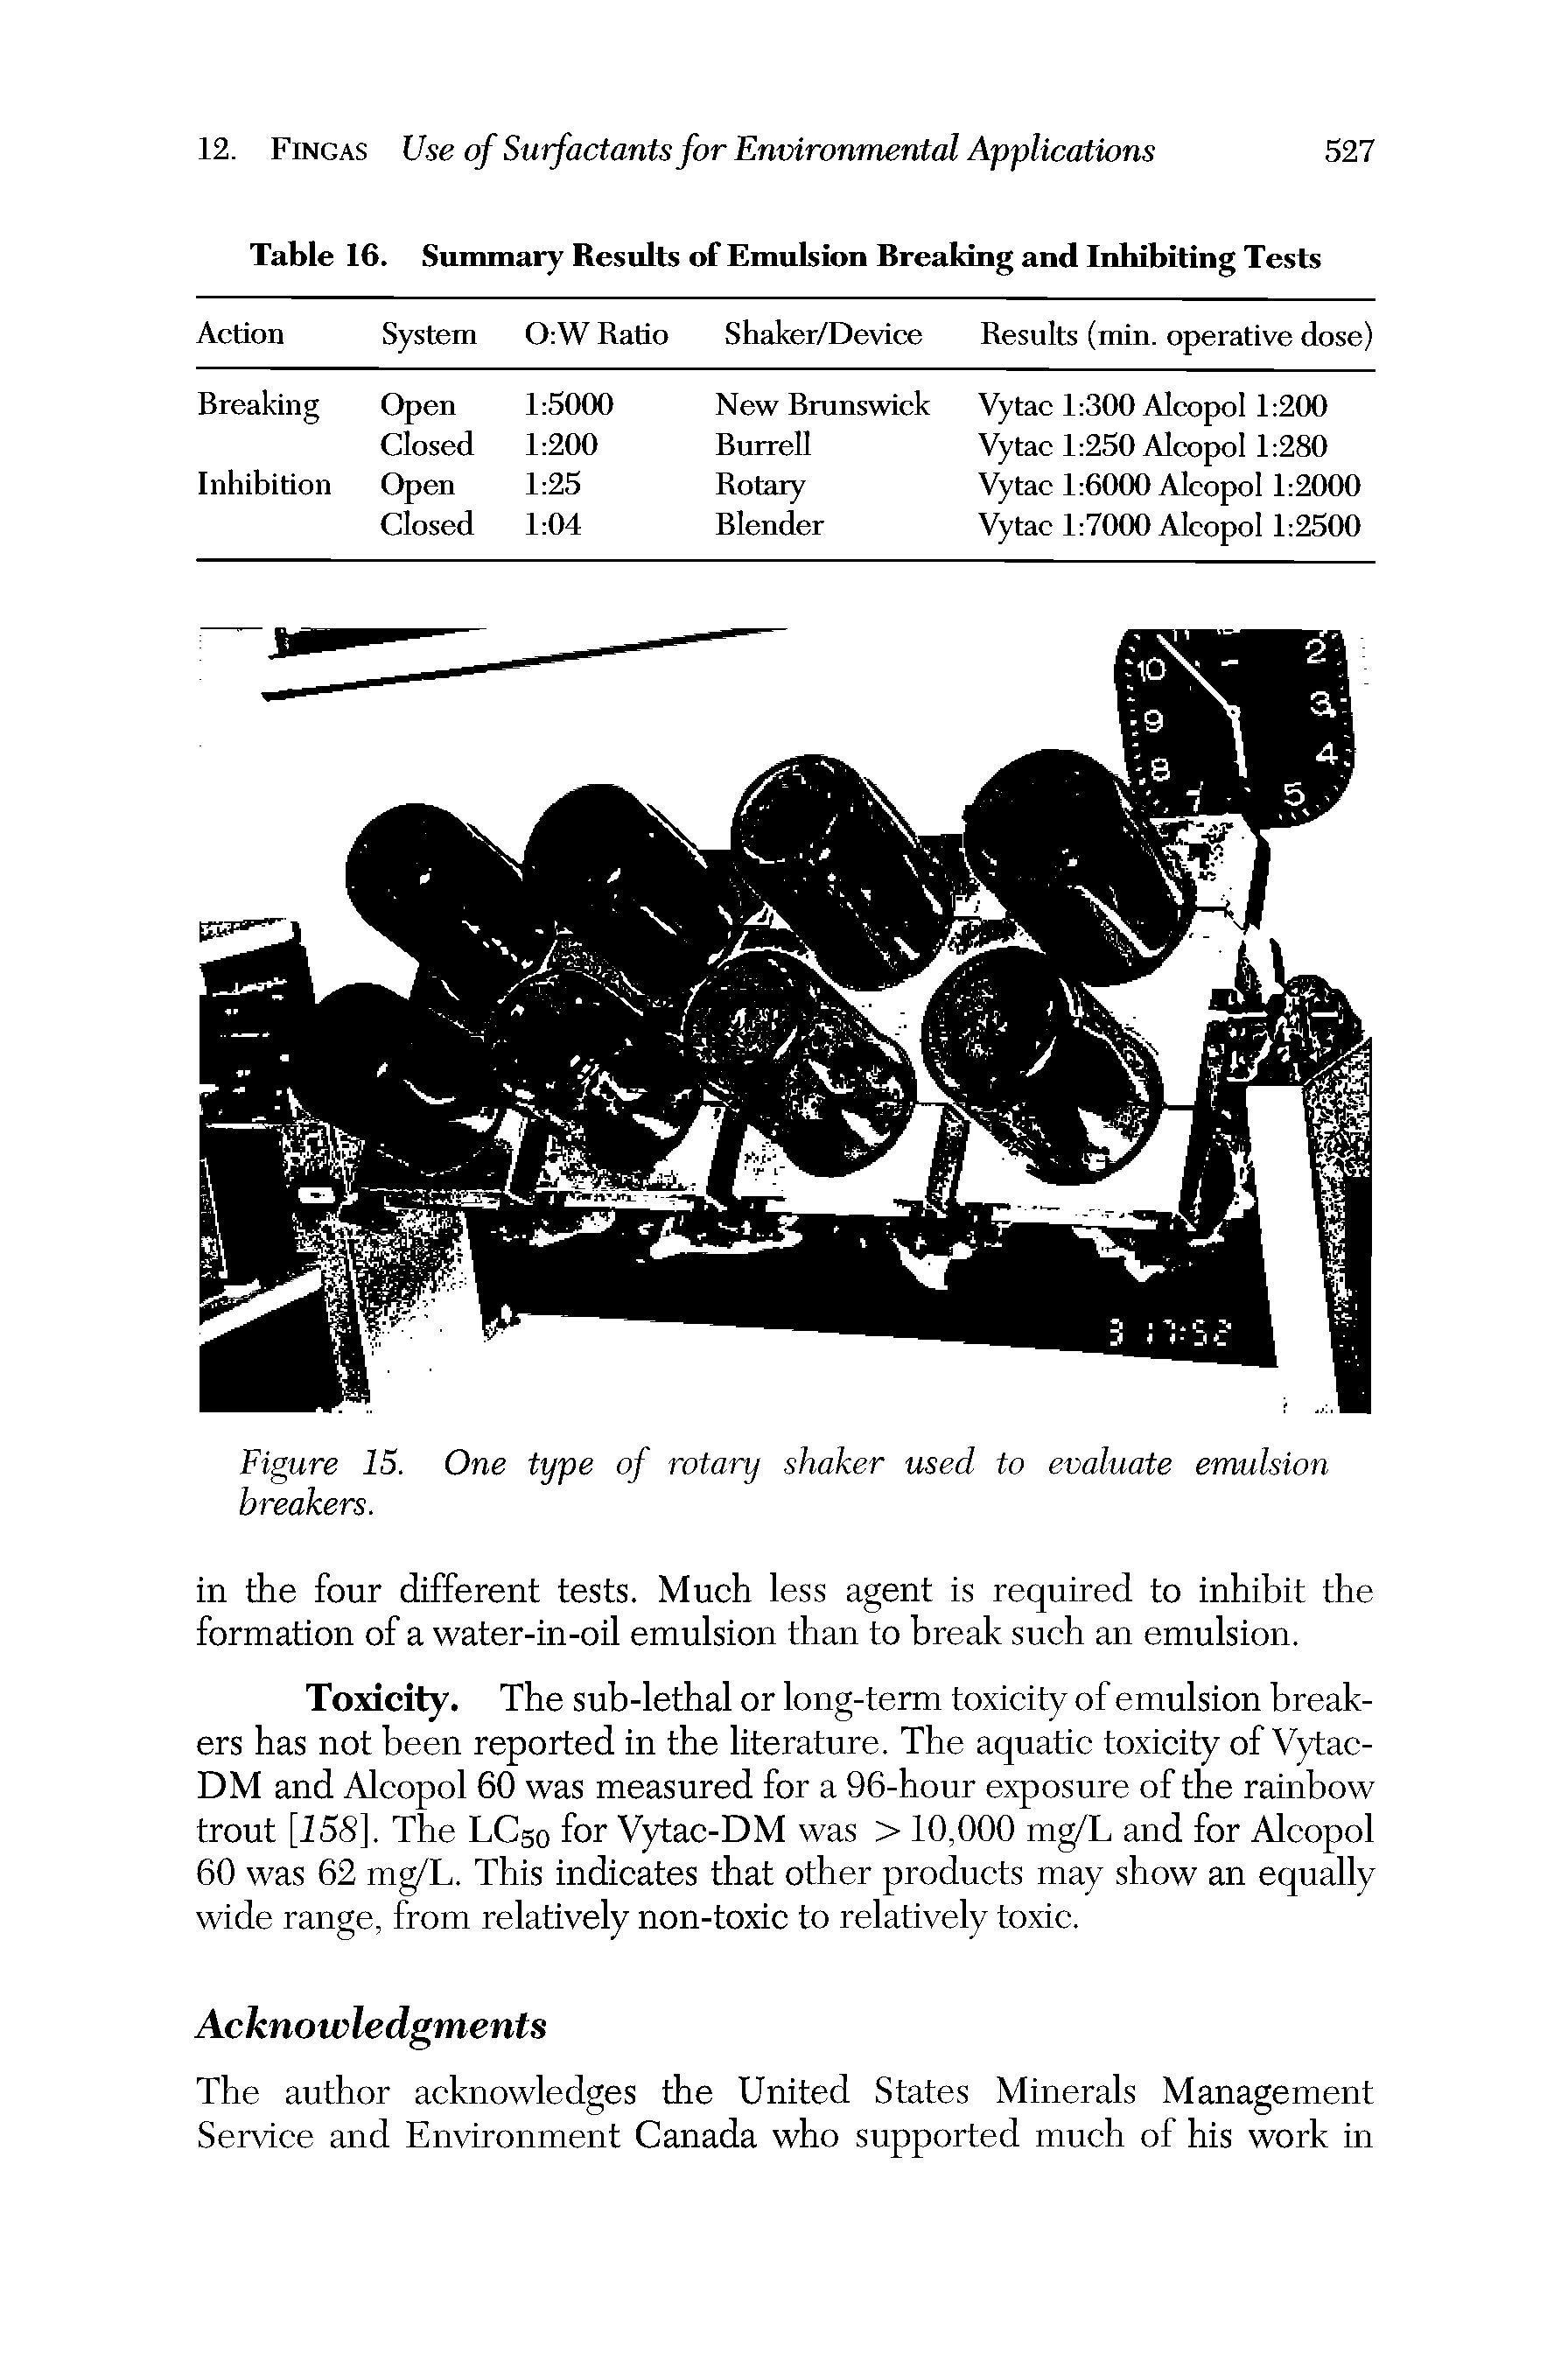 Figure 15. One type of rotary shaker used to evaluate emulsion breakers.